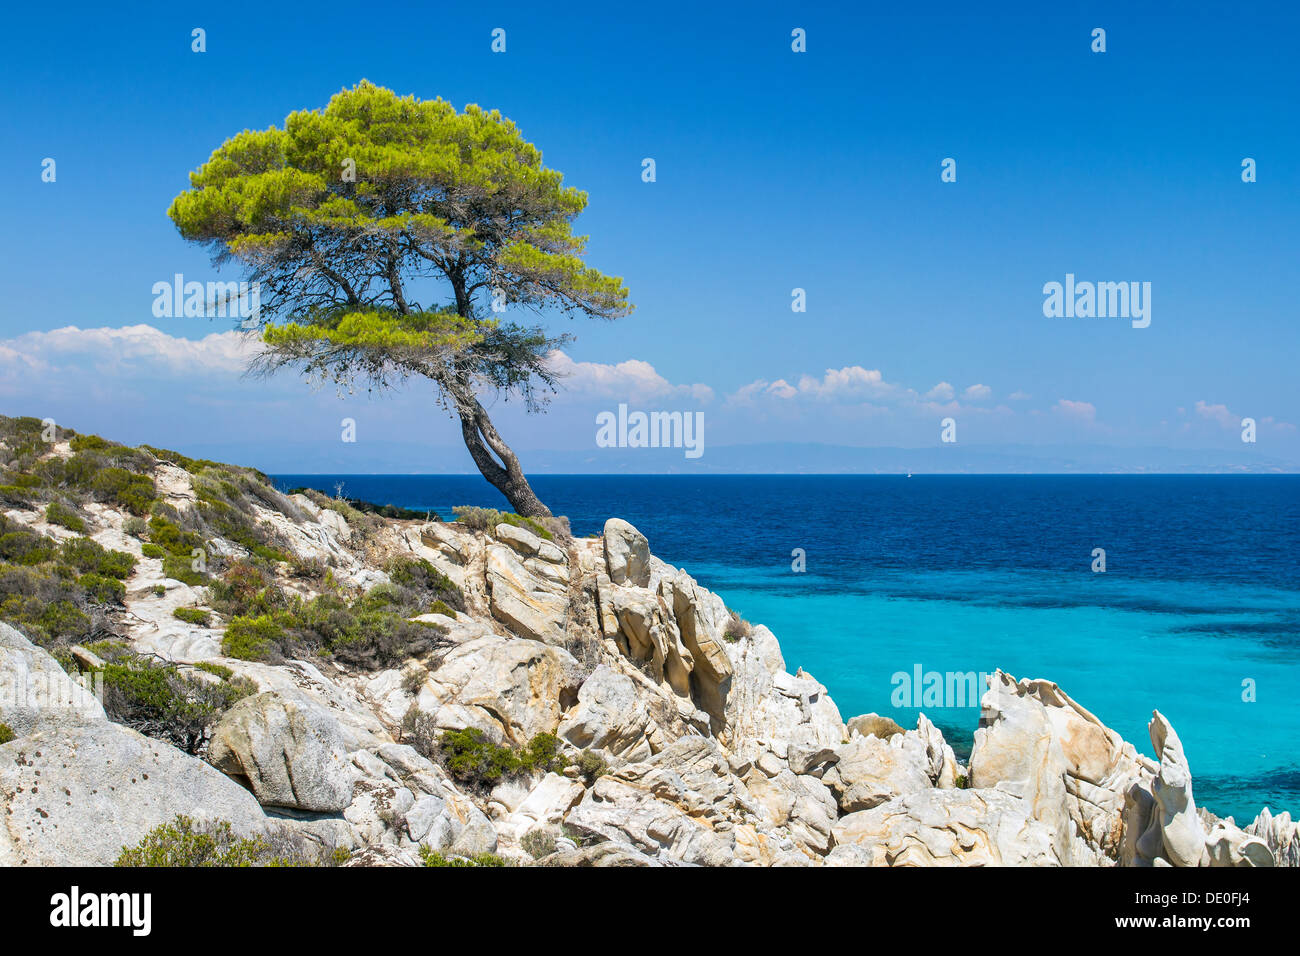 Pine forest tree by the sea in Halkidiki, Greece Stock Photo